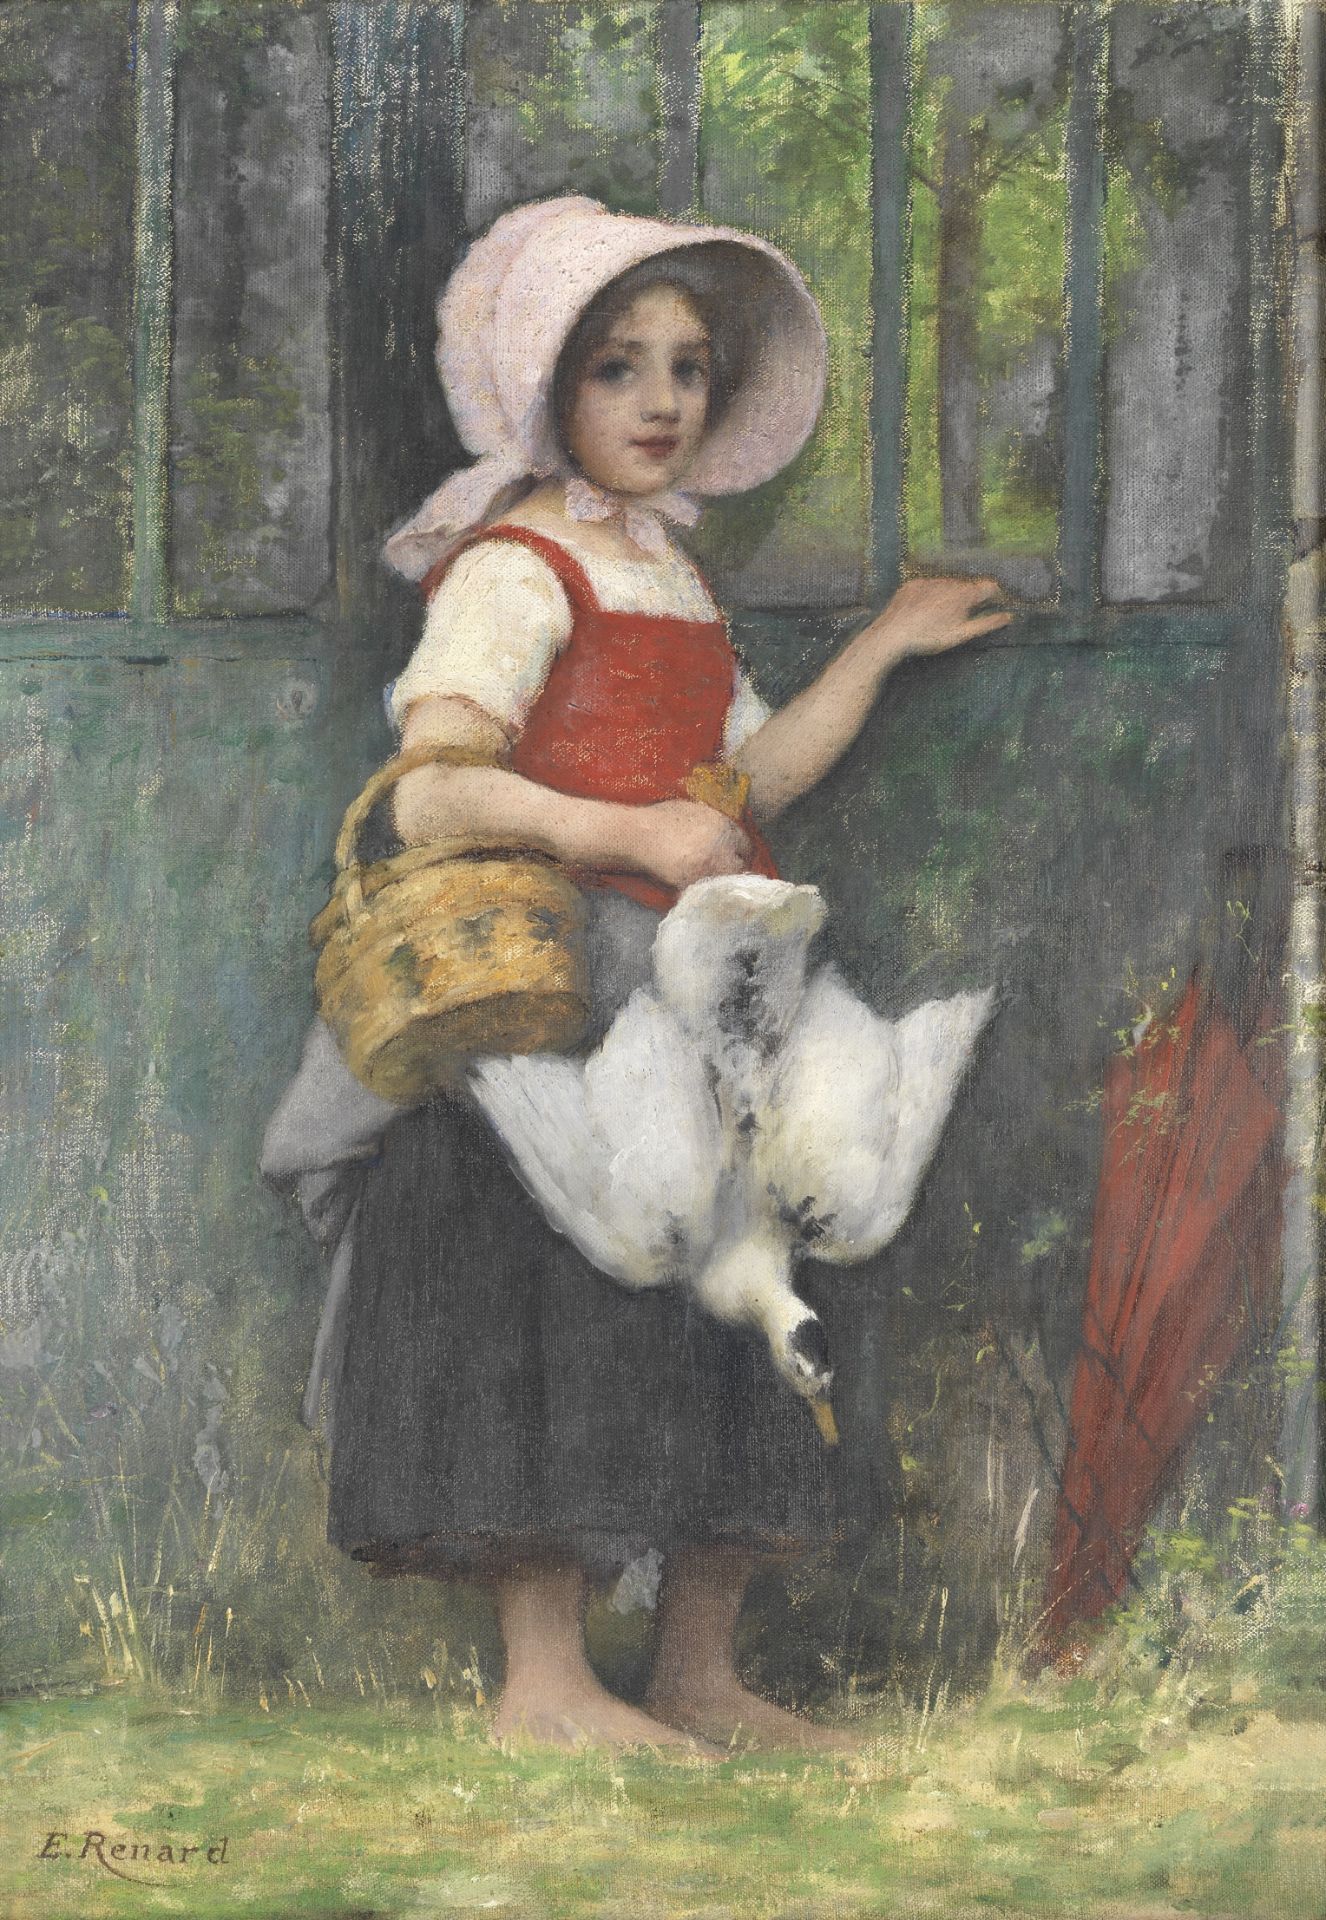 Emile Renard (French, 1850-1930) Young girl with a duck